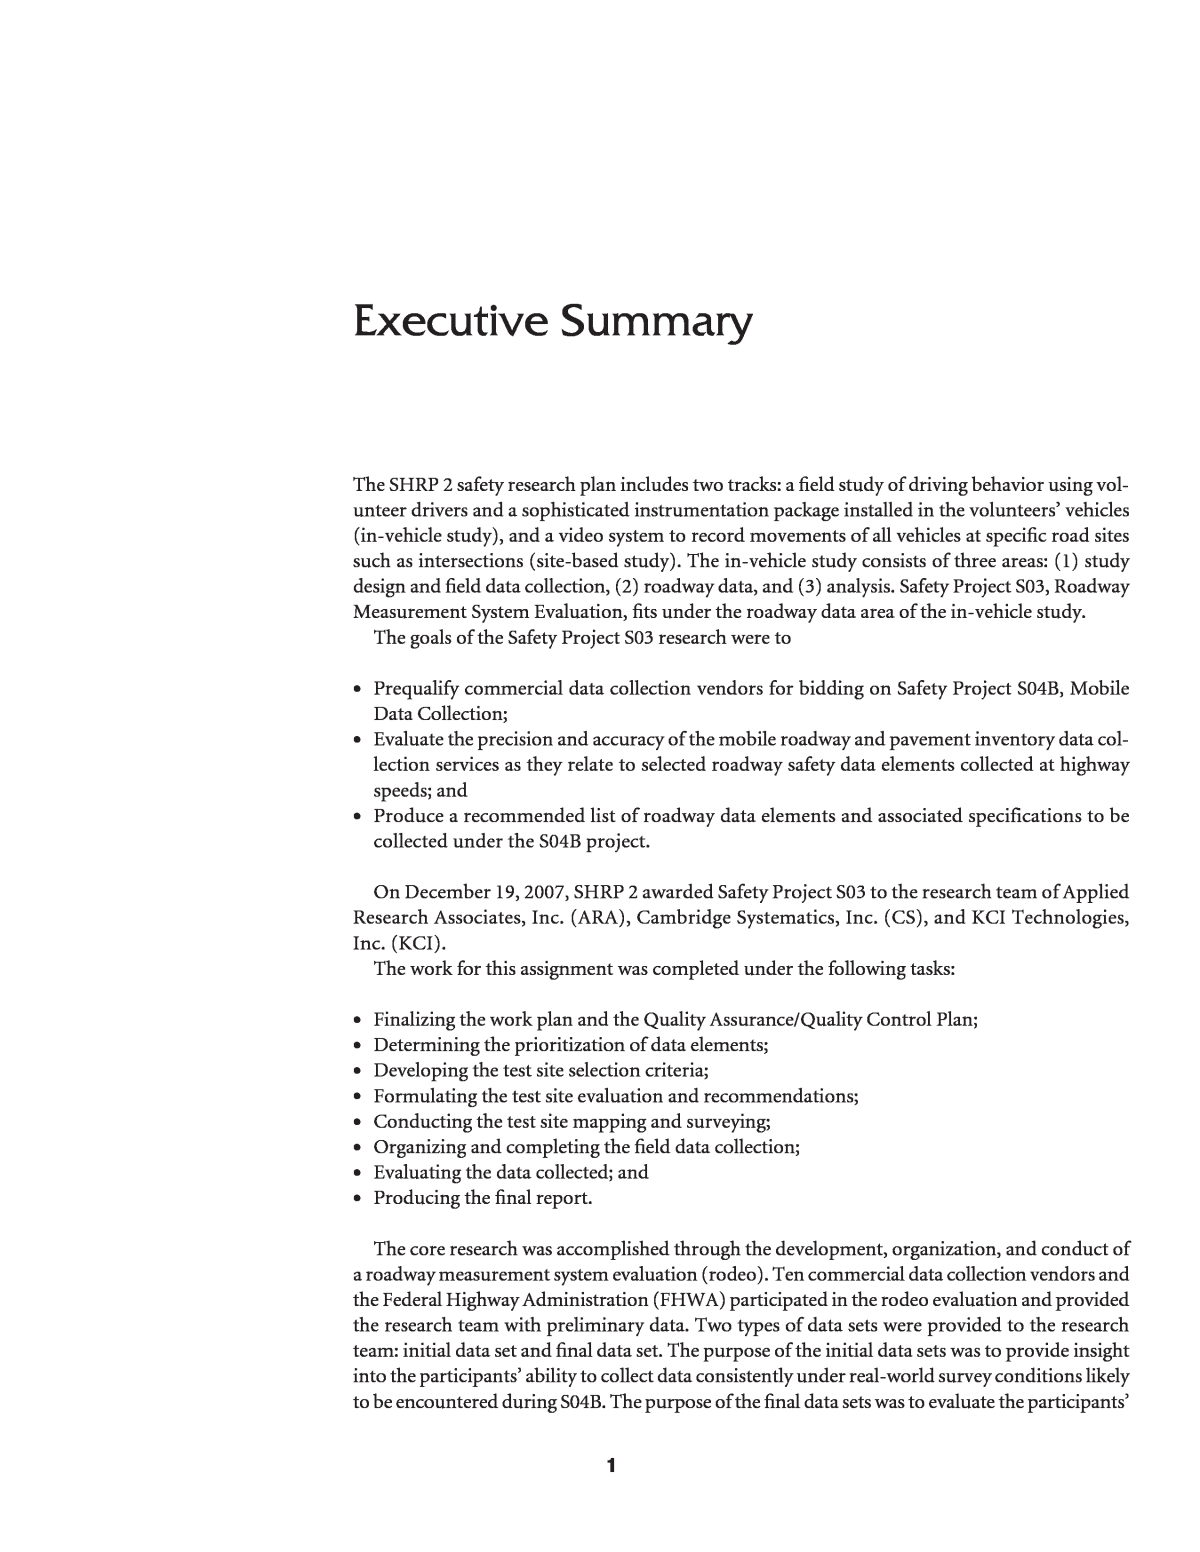 Executive Summary  Roadway Measurement System Evaluation  The